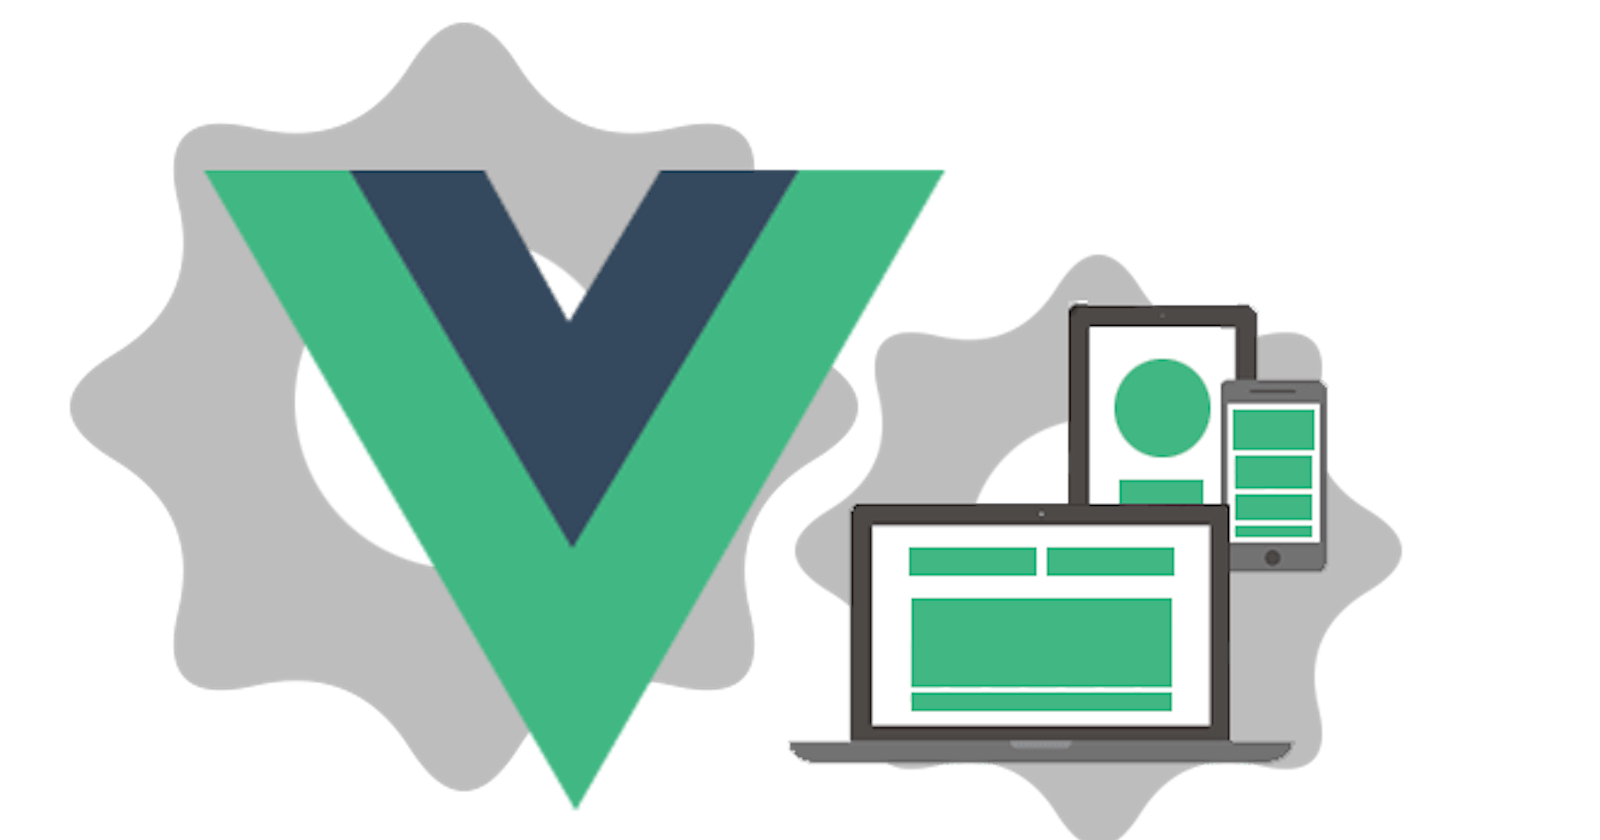 Getting Started with VueJS